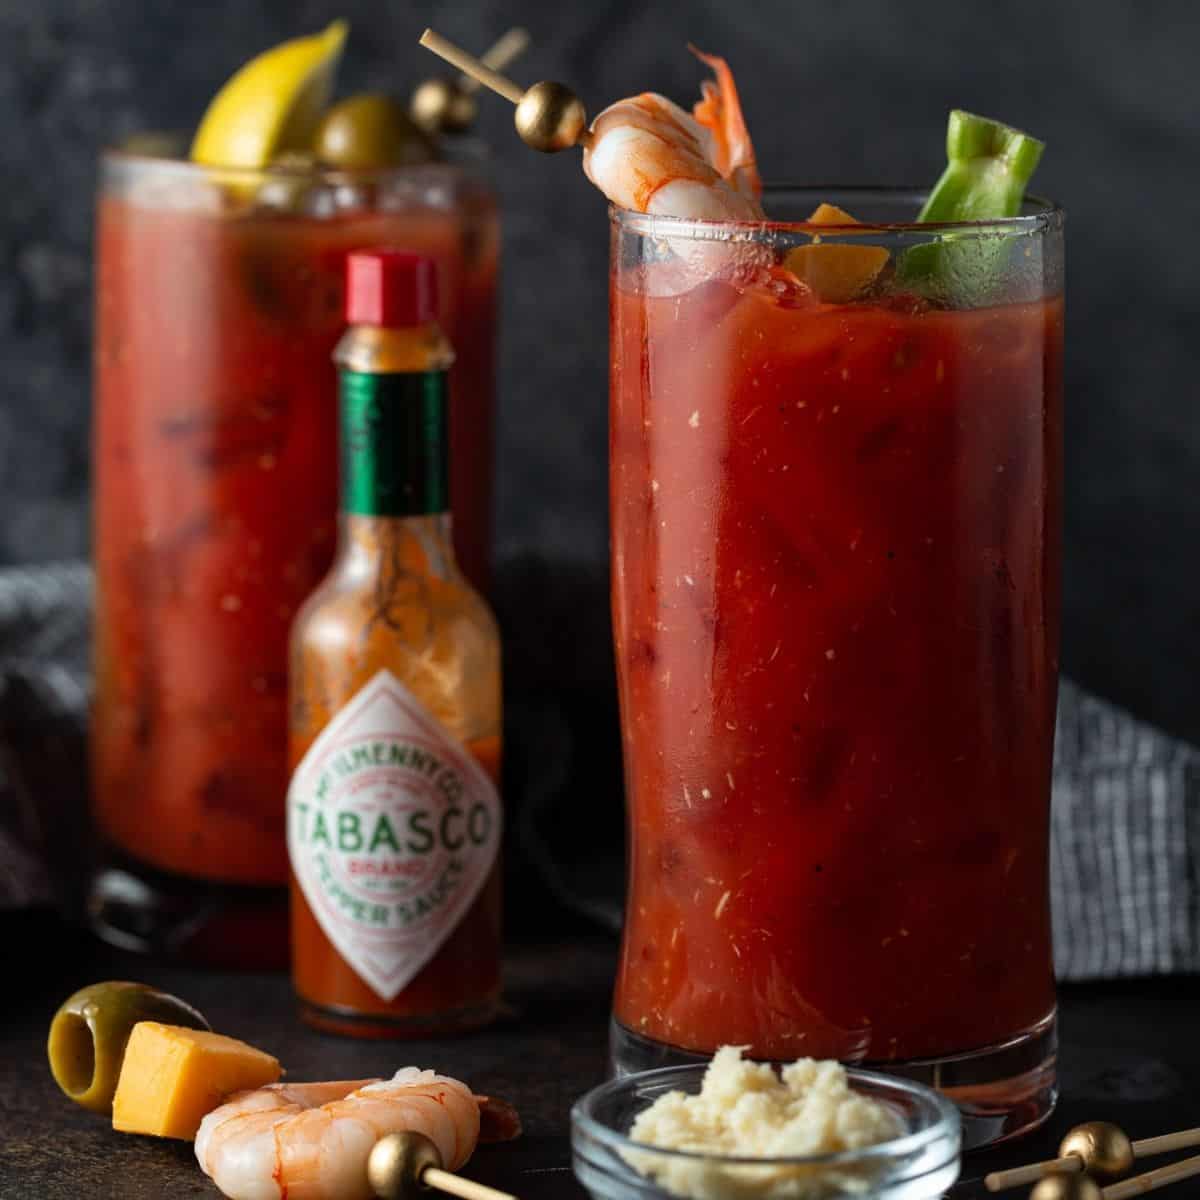 https://www.garnishwithlemon.com/wp-content/uploads/2018/02/Bloody-Mary-Featured-image.jpg